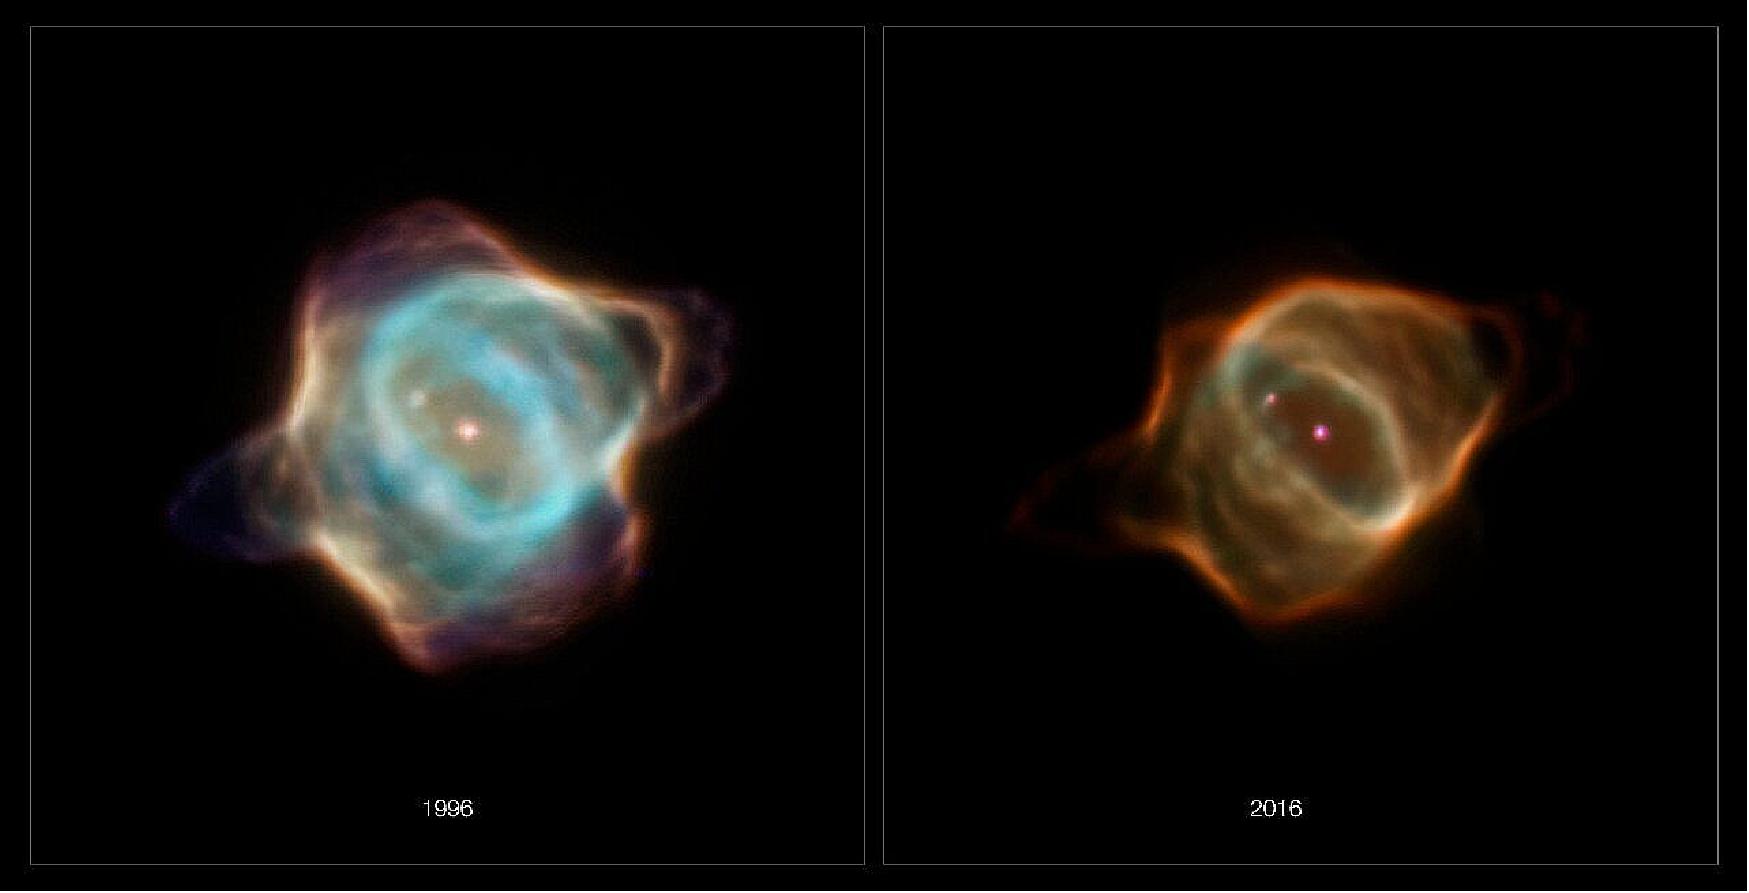 Figure 8: Archival data from the NASA/ESA Hubble Space Telescope reveal that the nebula Hen 3-1357, nicknamed the Stingray nebula, has faded precipitously over just the past two decades. Witnessing such a swift rate of change in a planetary nebula is exceedingly rare, say researchers. - These images captured by Hubble in 1996 (left), when compared to Hubble images taken in 2016 (right), show a nebula that has drastically dimmed in brightness and changed shape. Bright blue shells of gas near the center of the nebula have all but disappeared, and the wavy edges that earned this nebula its aquatic-themed name are virtually gone. The young nebula no longer pops against the black velvet background of the distant Universe [image credit: NASA, ESA, B. Balick (University of Washington), M. Guerrero (Instituto de Astrofisica de Andalucia), and G. Ramos-Larios (Universidad de Guadalajara)]